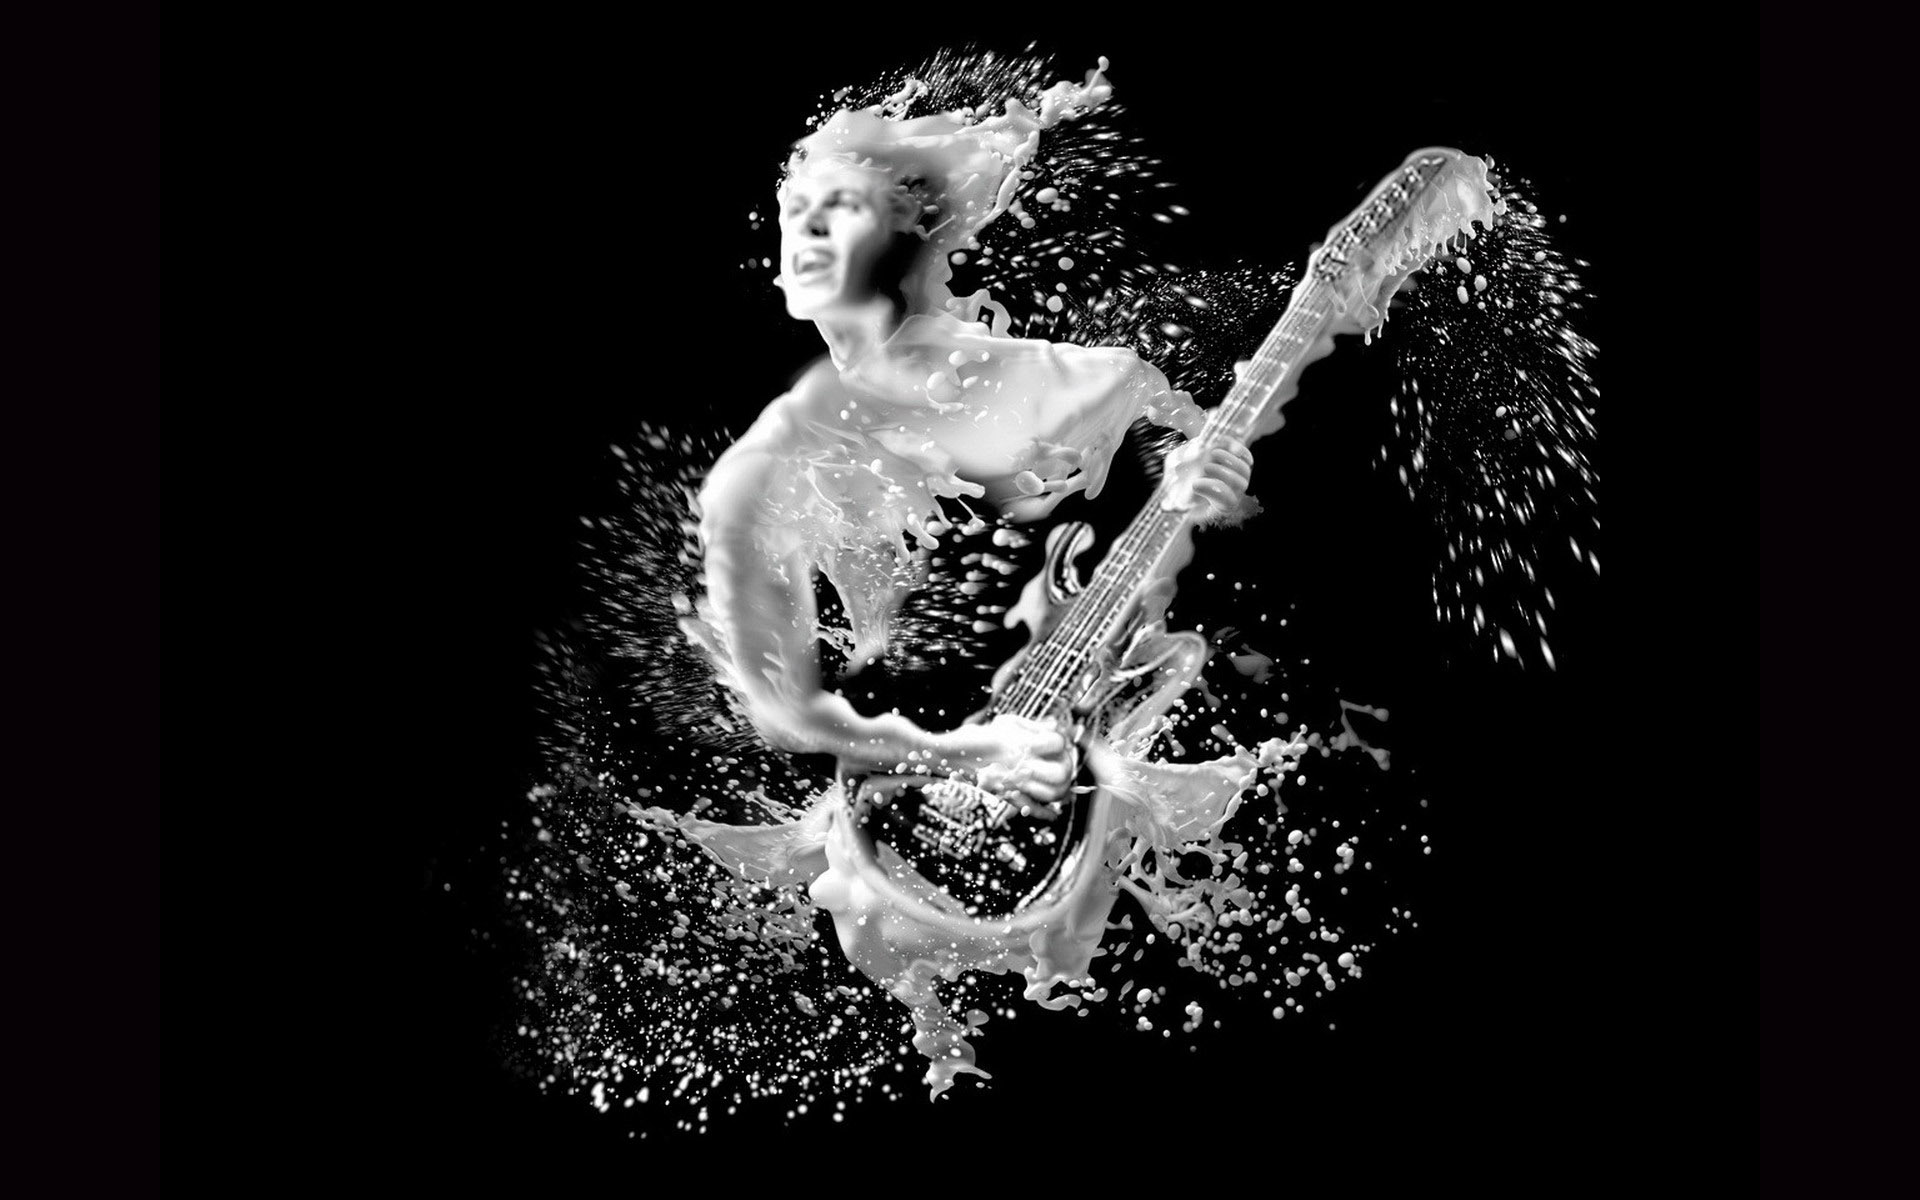 Man playing guitar in black and white powerpoint background